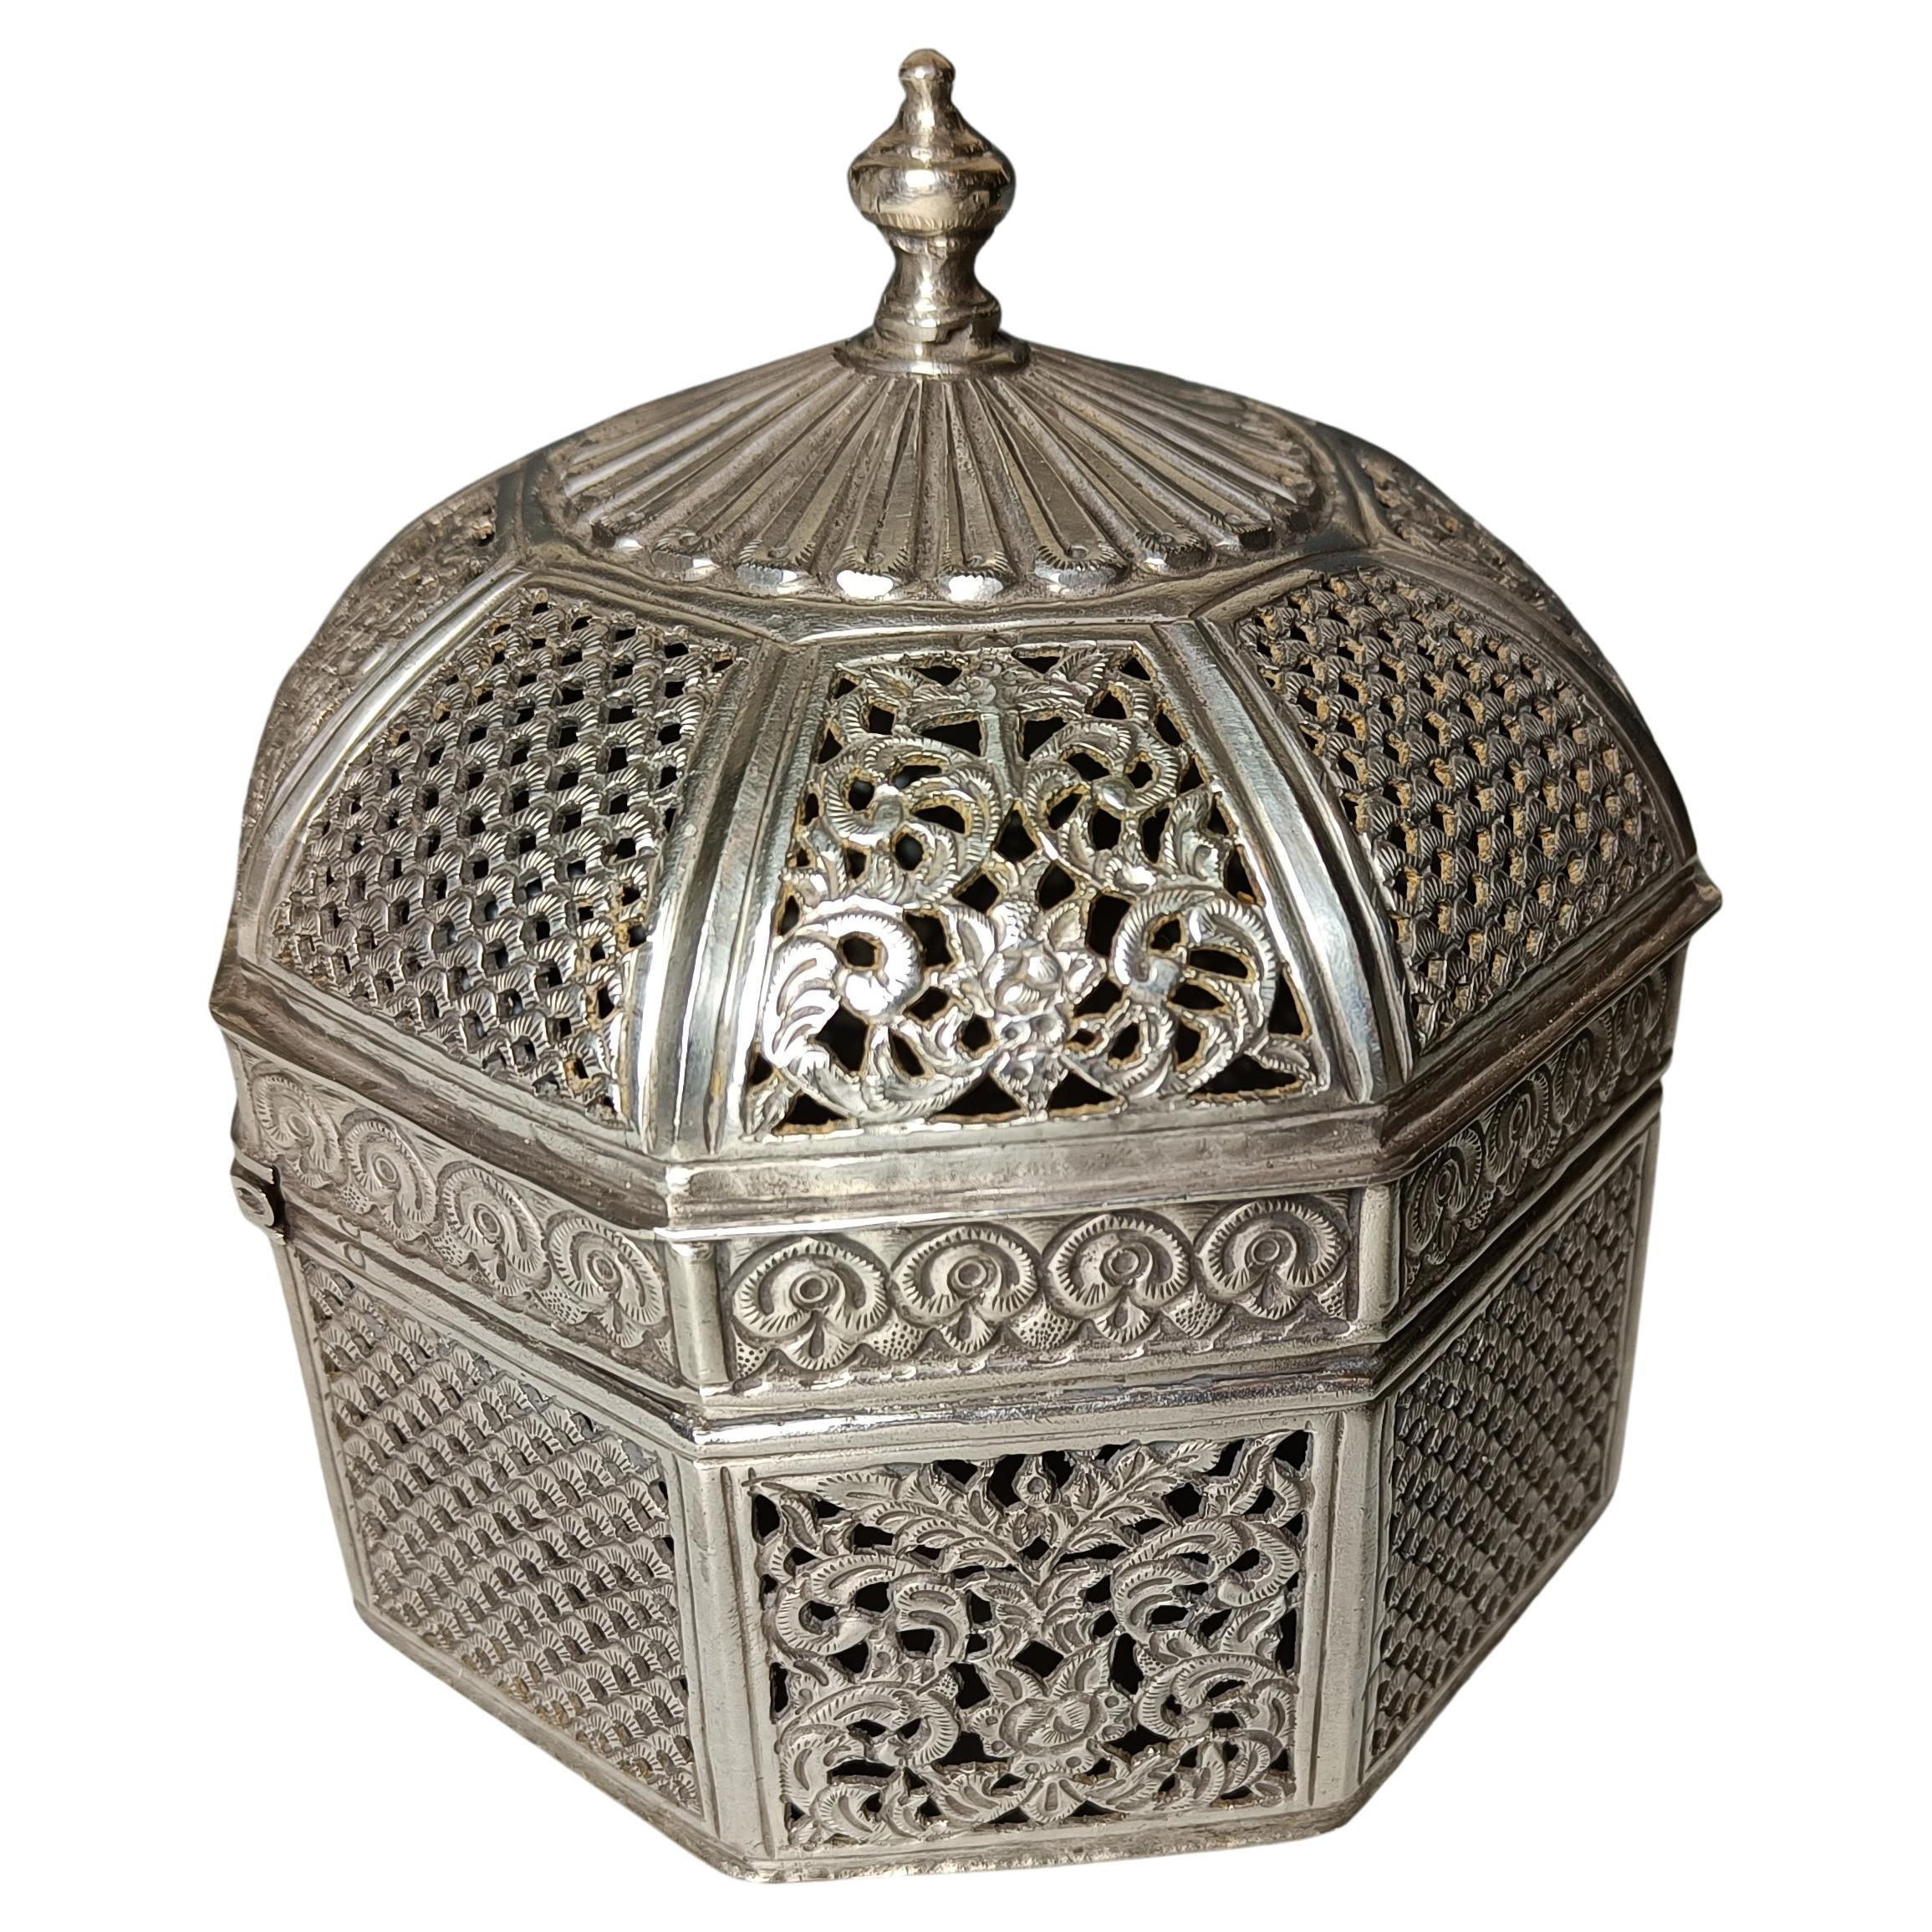 Superb Rare large Octagonal Domed Indian Mughal Silver Box Antiques Asian Art For Sale